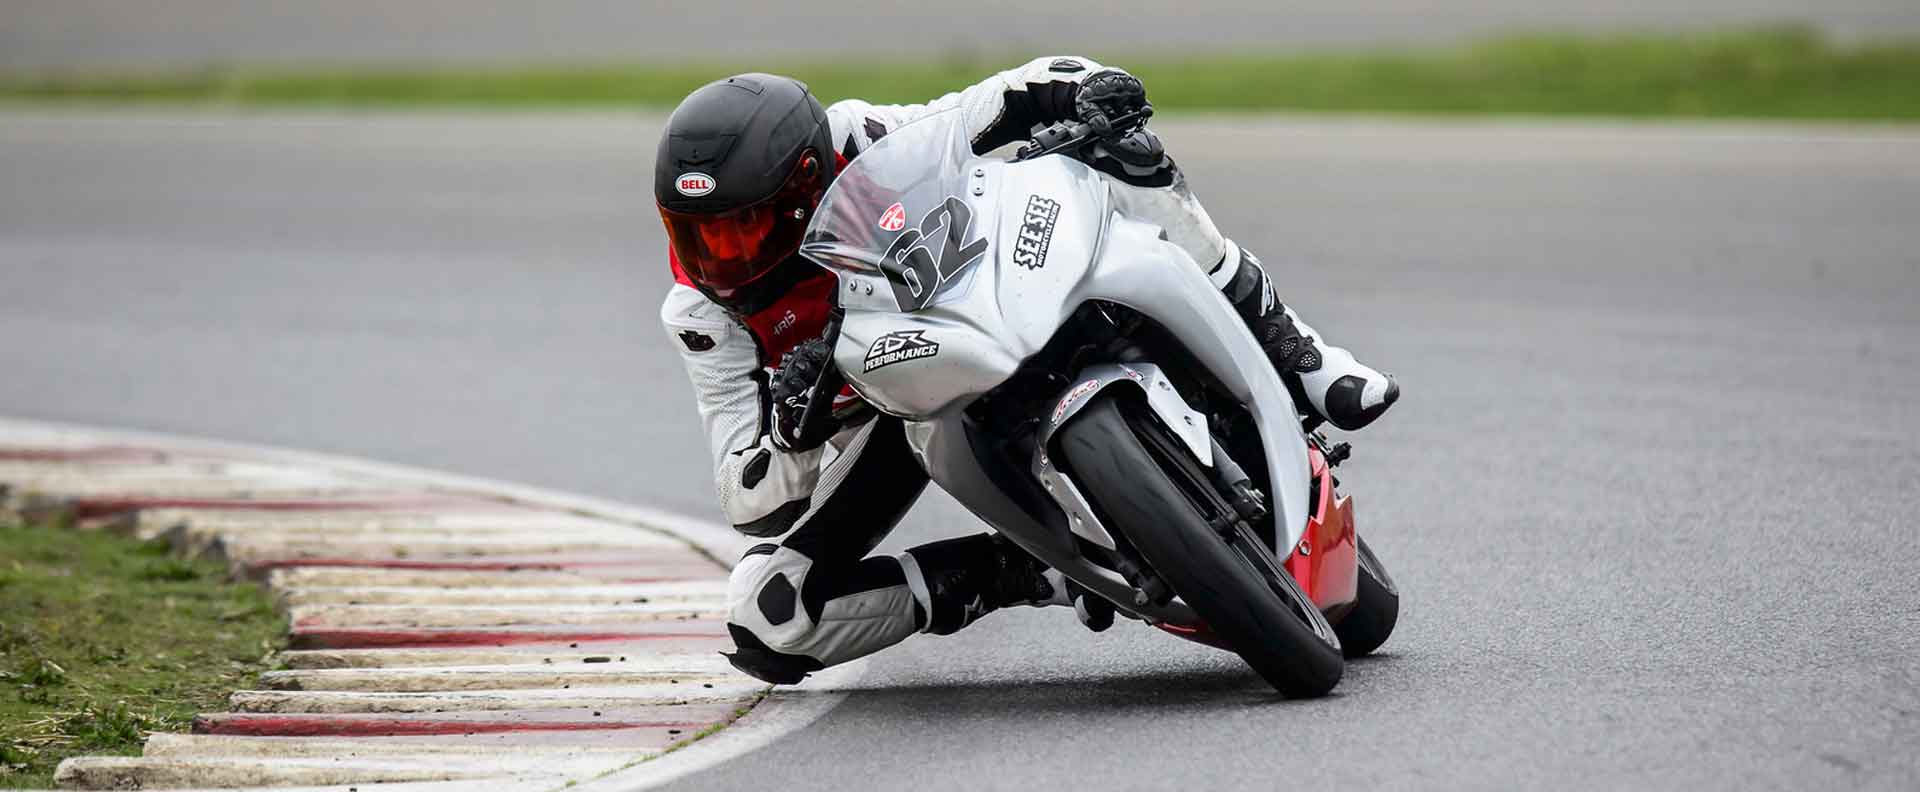 Andy riding riding at a moto Corsa track day as an instructor on his Ninja